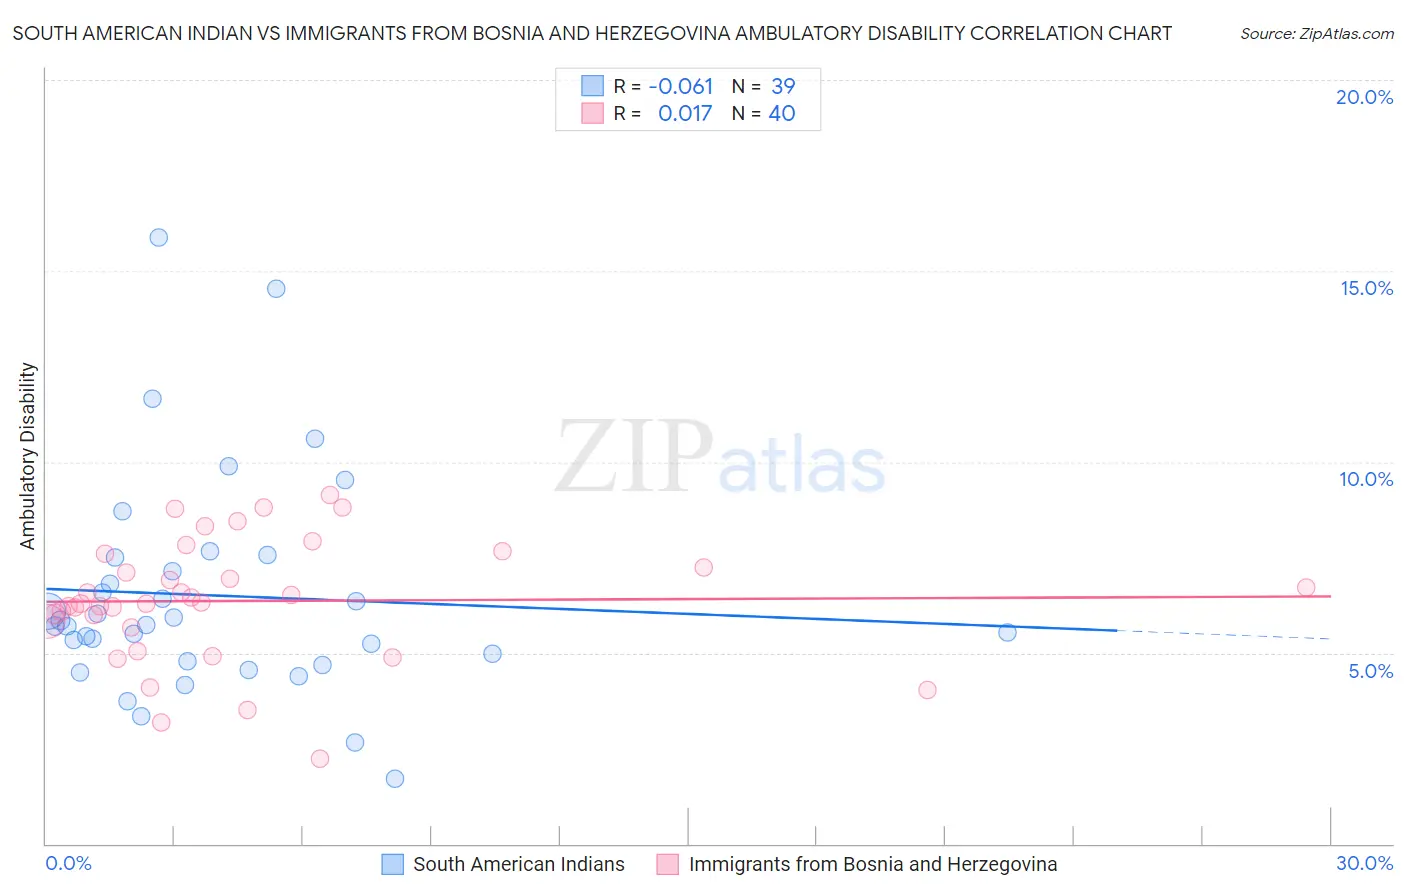 South American Indian vs Immigrants from Bosnia and Herzegovina Ambulatory Disability